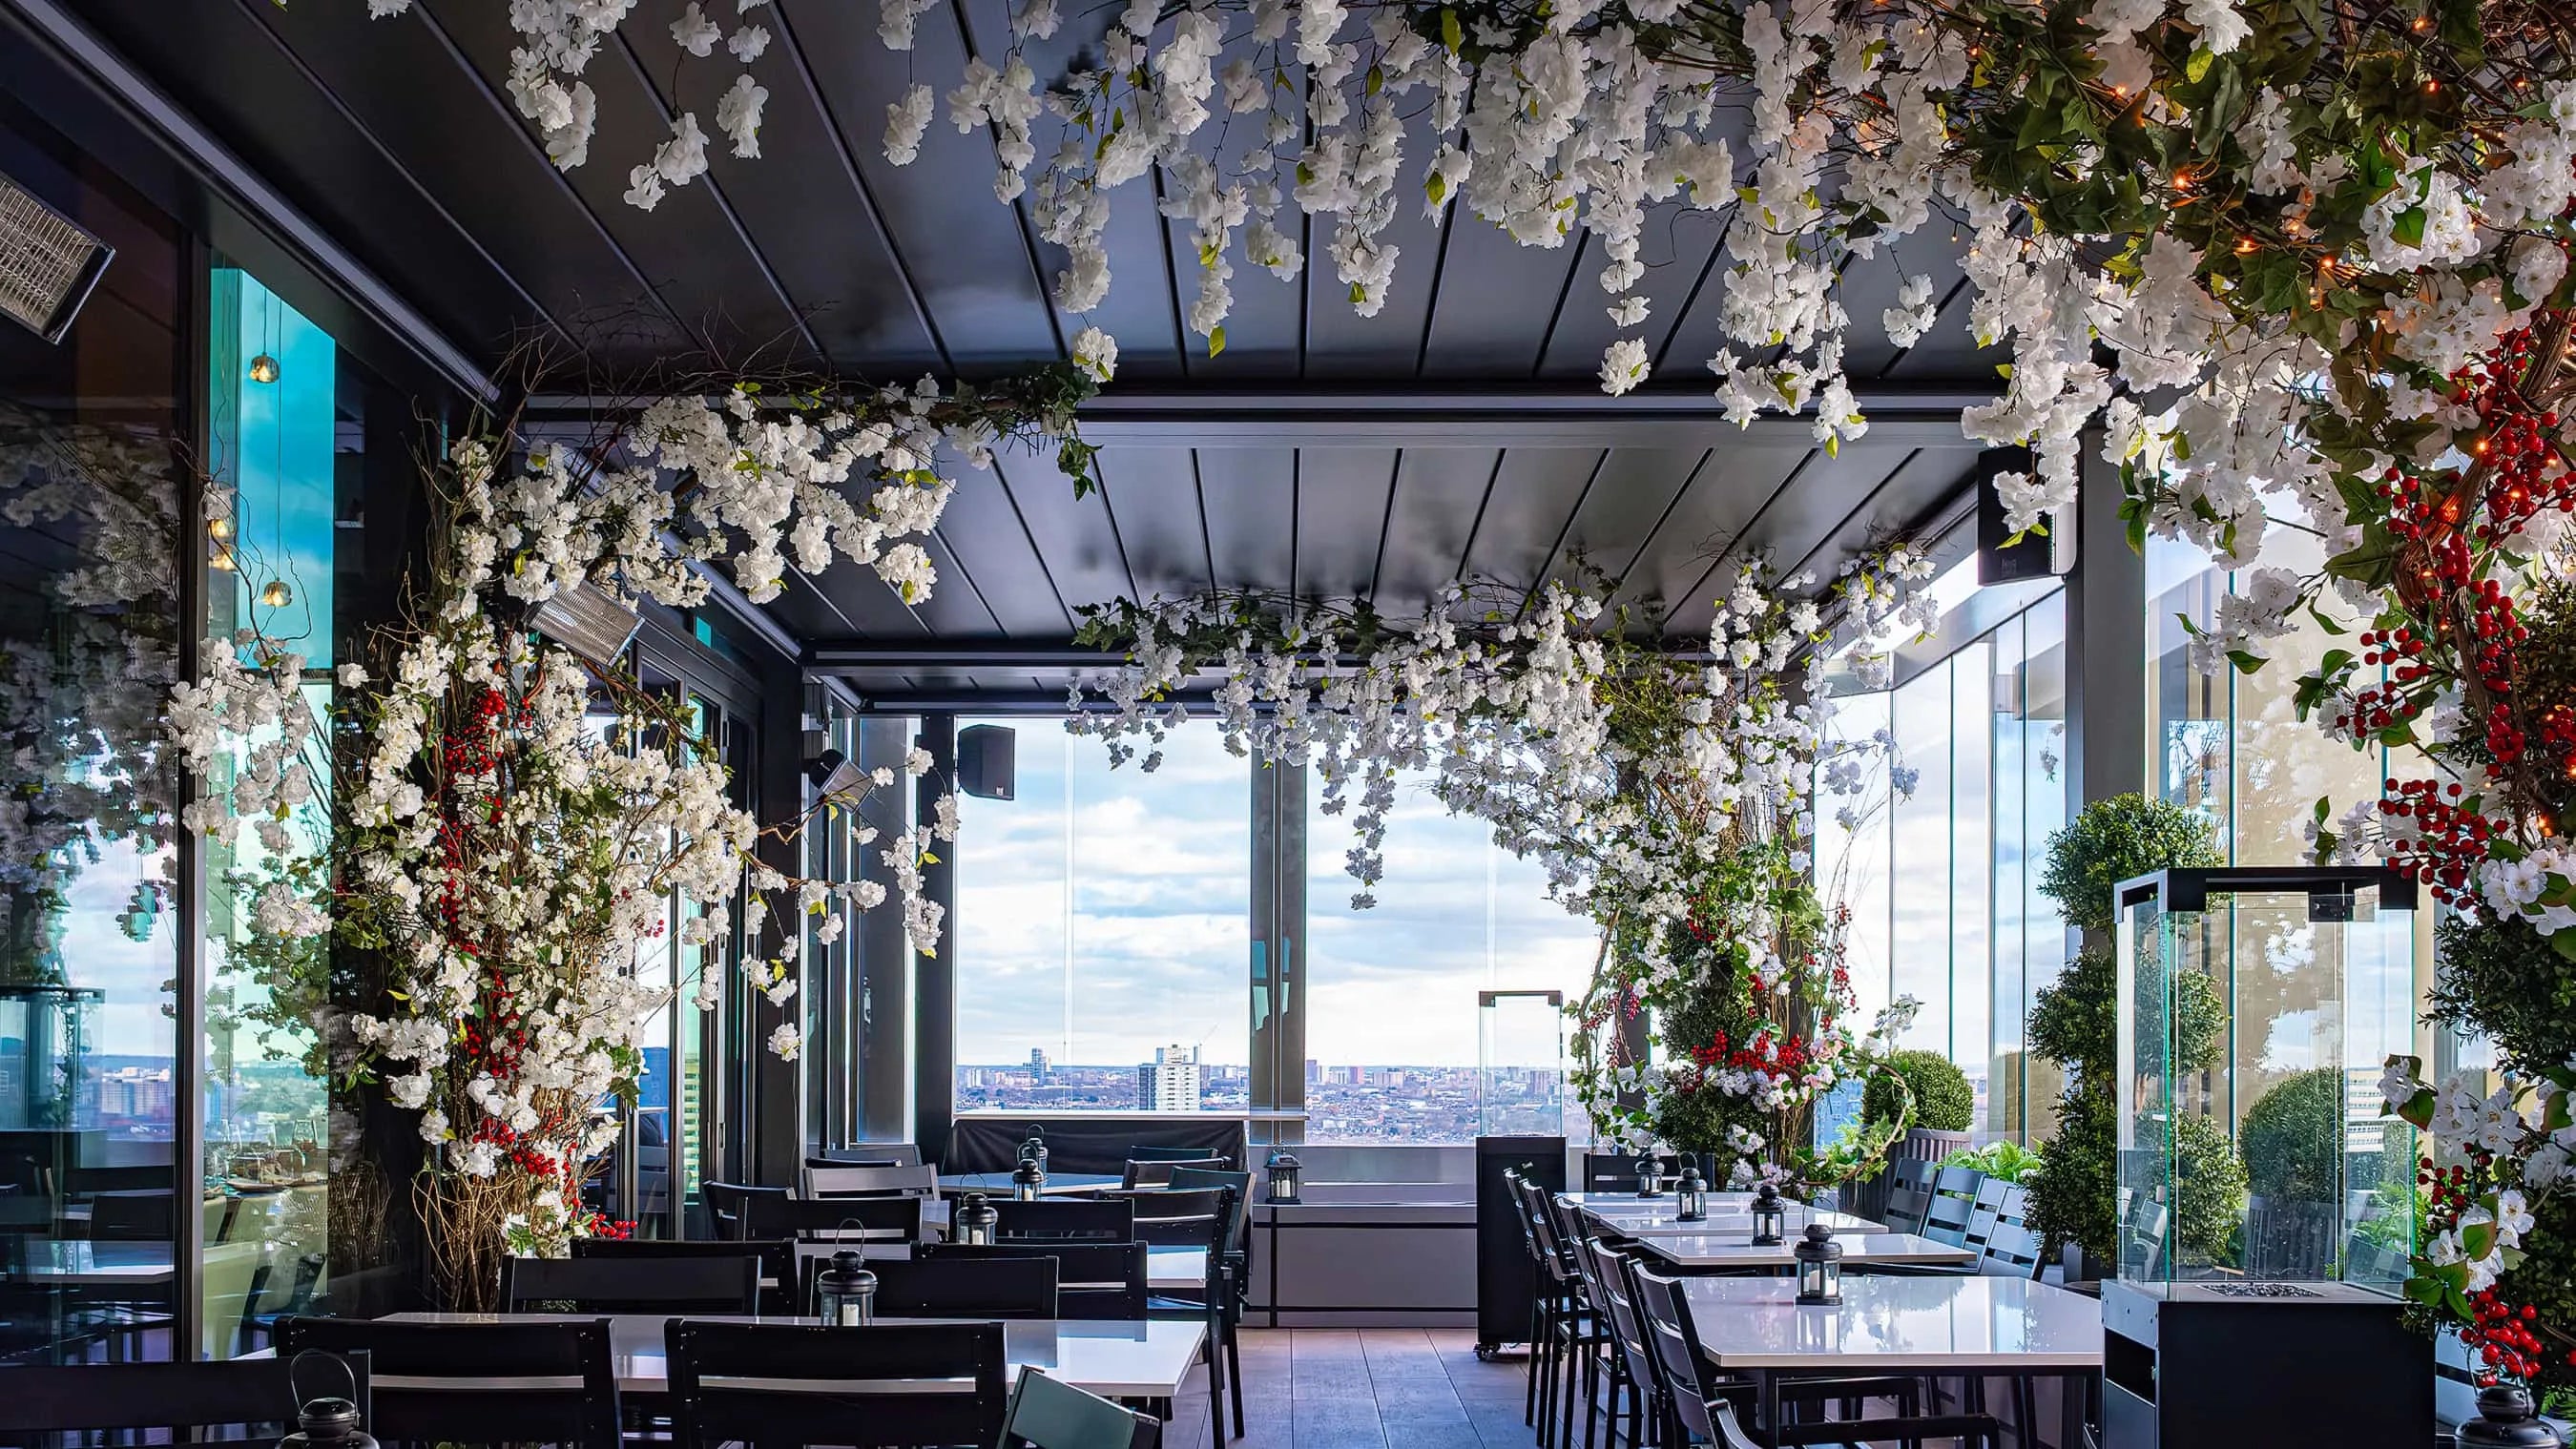 Elegant rooftop dining area at STK Steakhouse with a ceiling and pillars adorned with white blossoms and greenery, accented with red berries, offering a panoramic view of the cityscape through floor-to-ceiling windows.